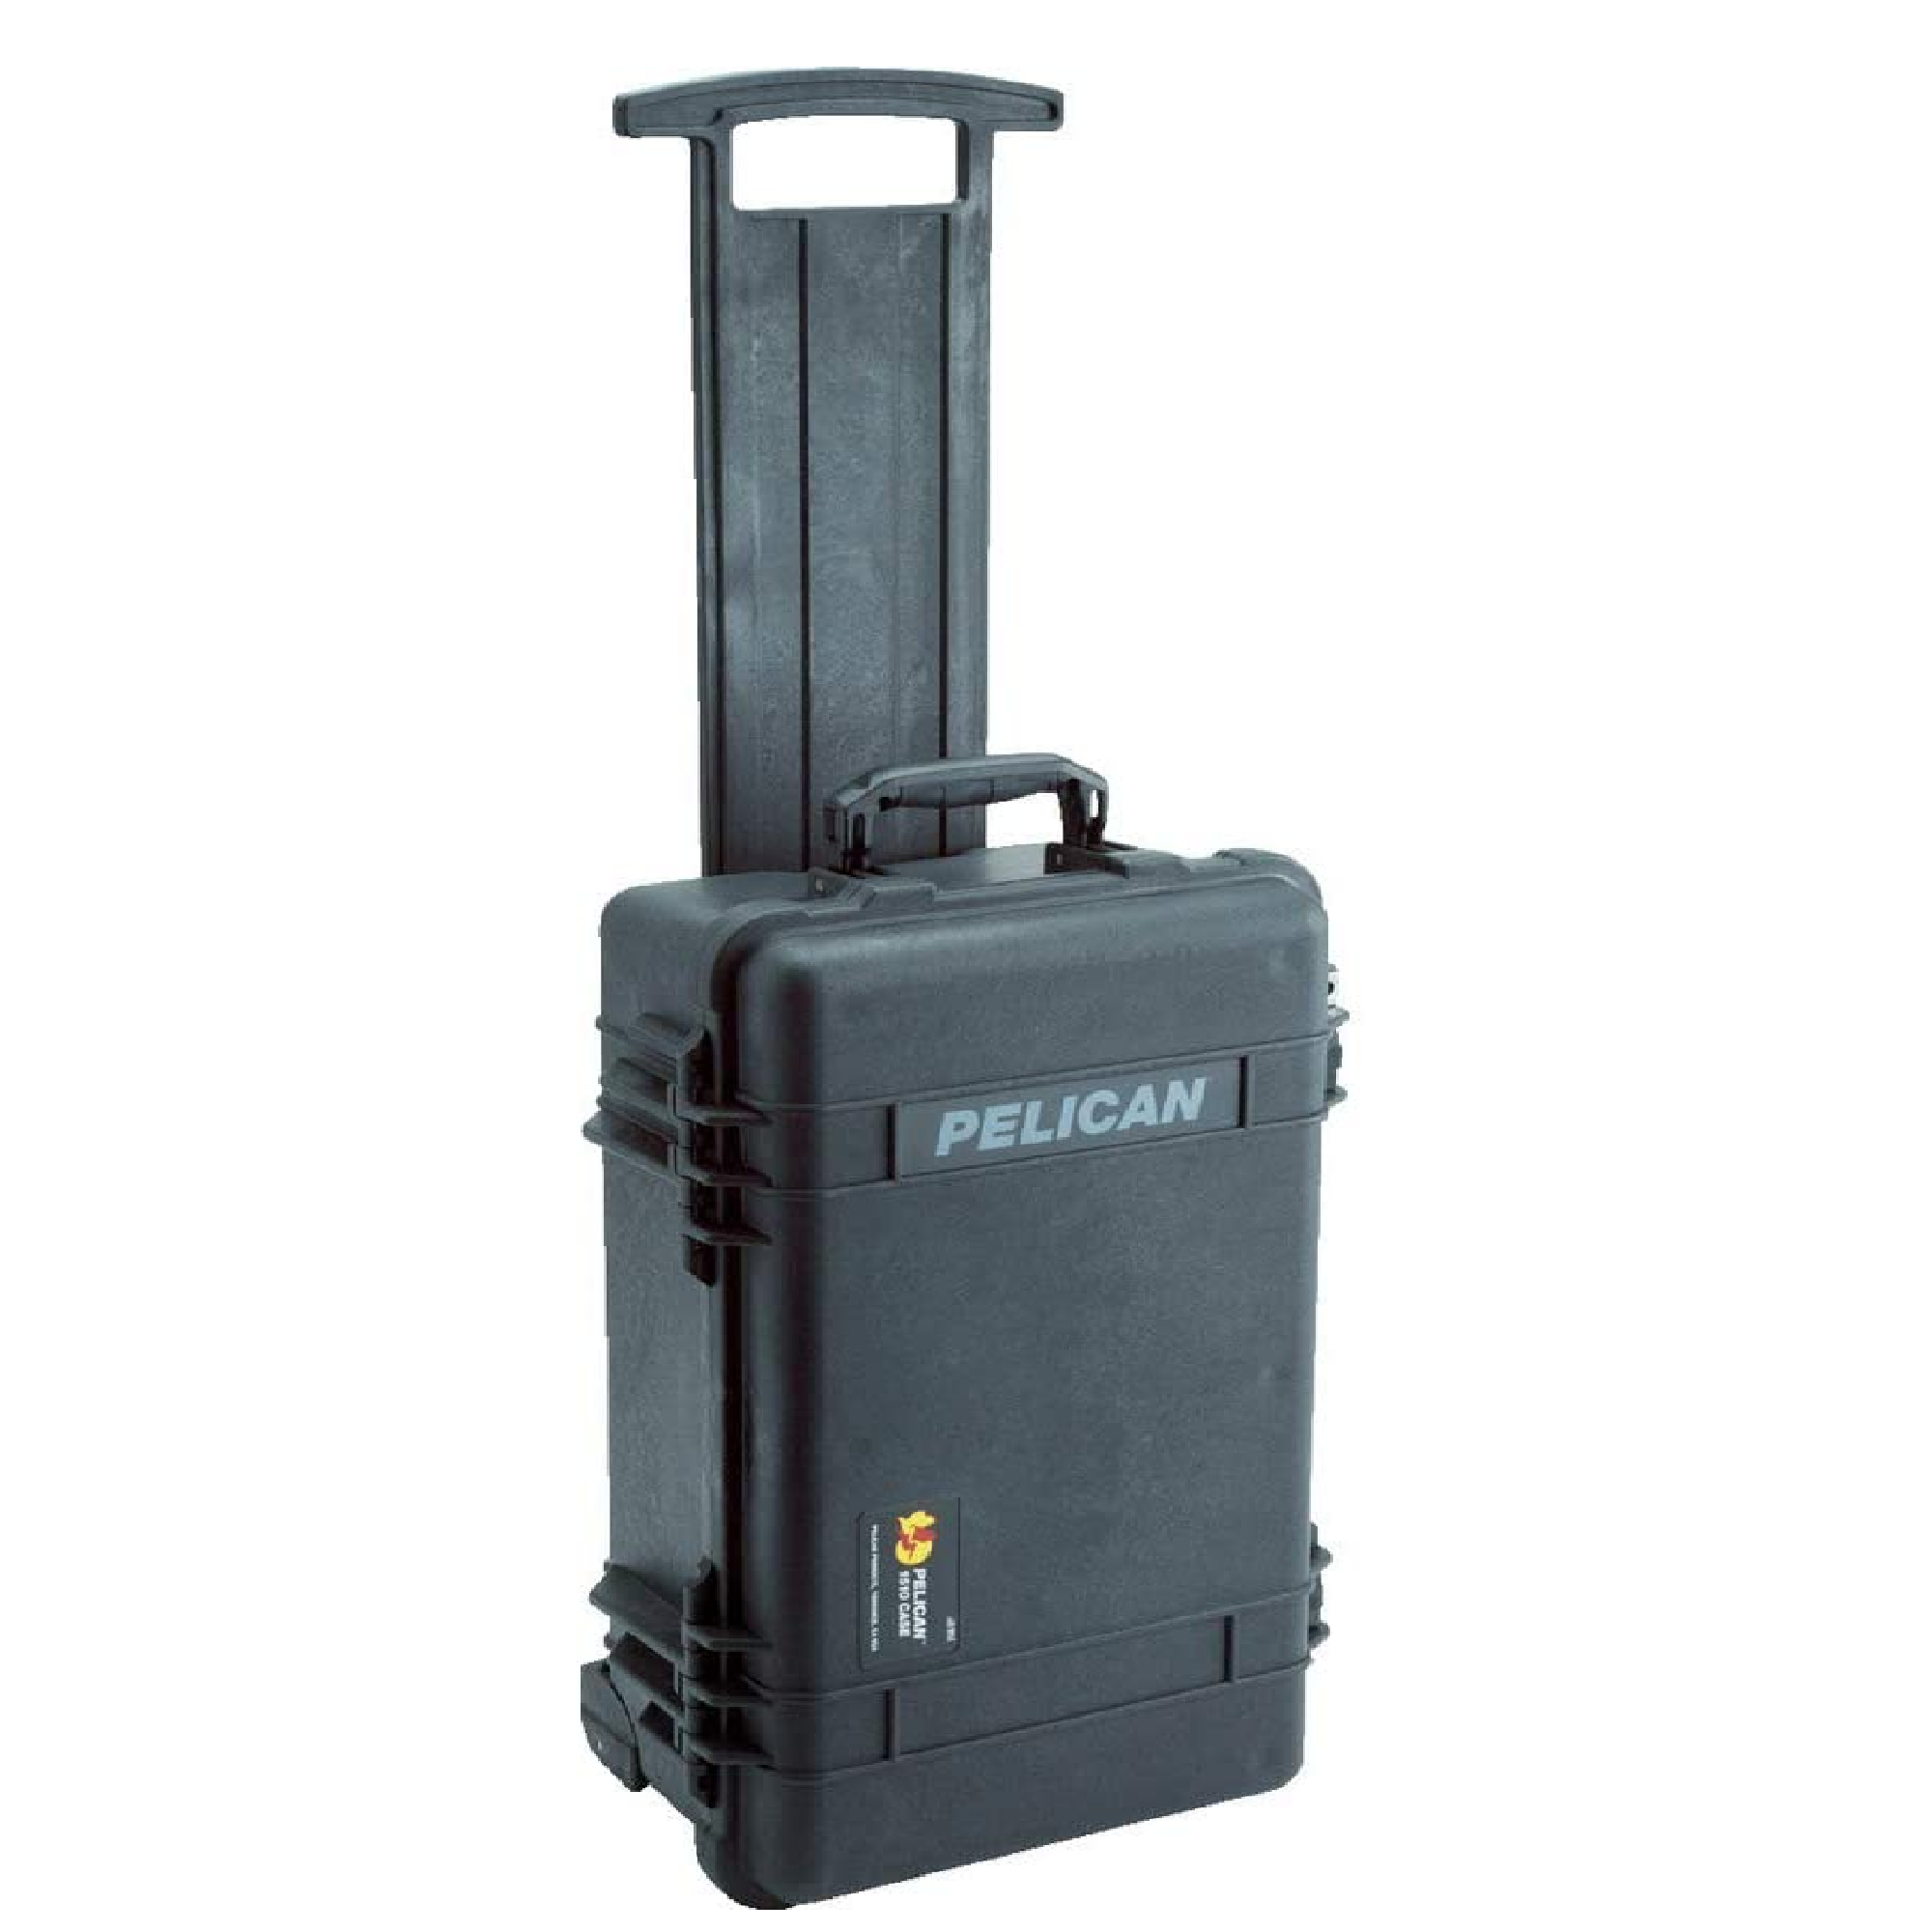 Pelican 1510 Protector Carry-On Case Black With Internal Foam